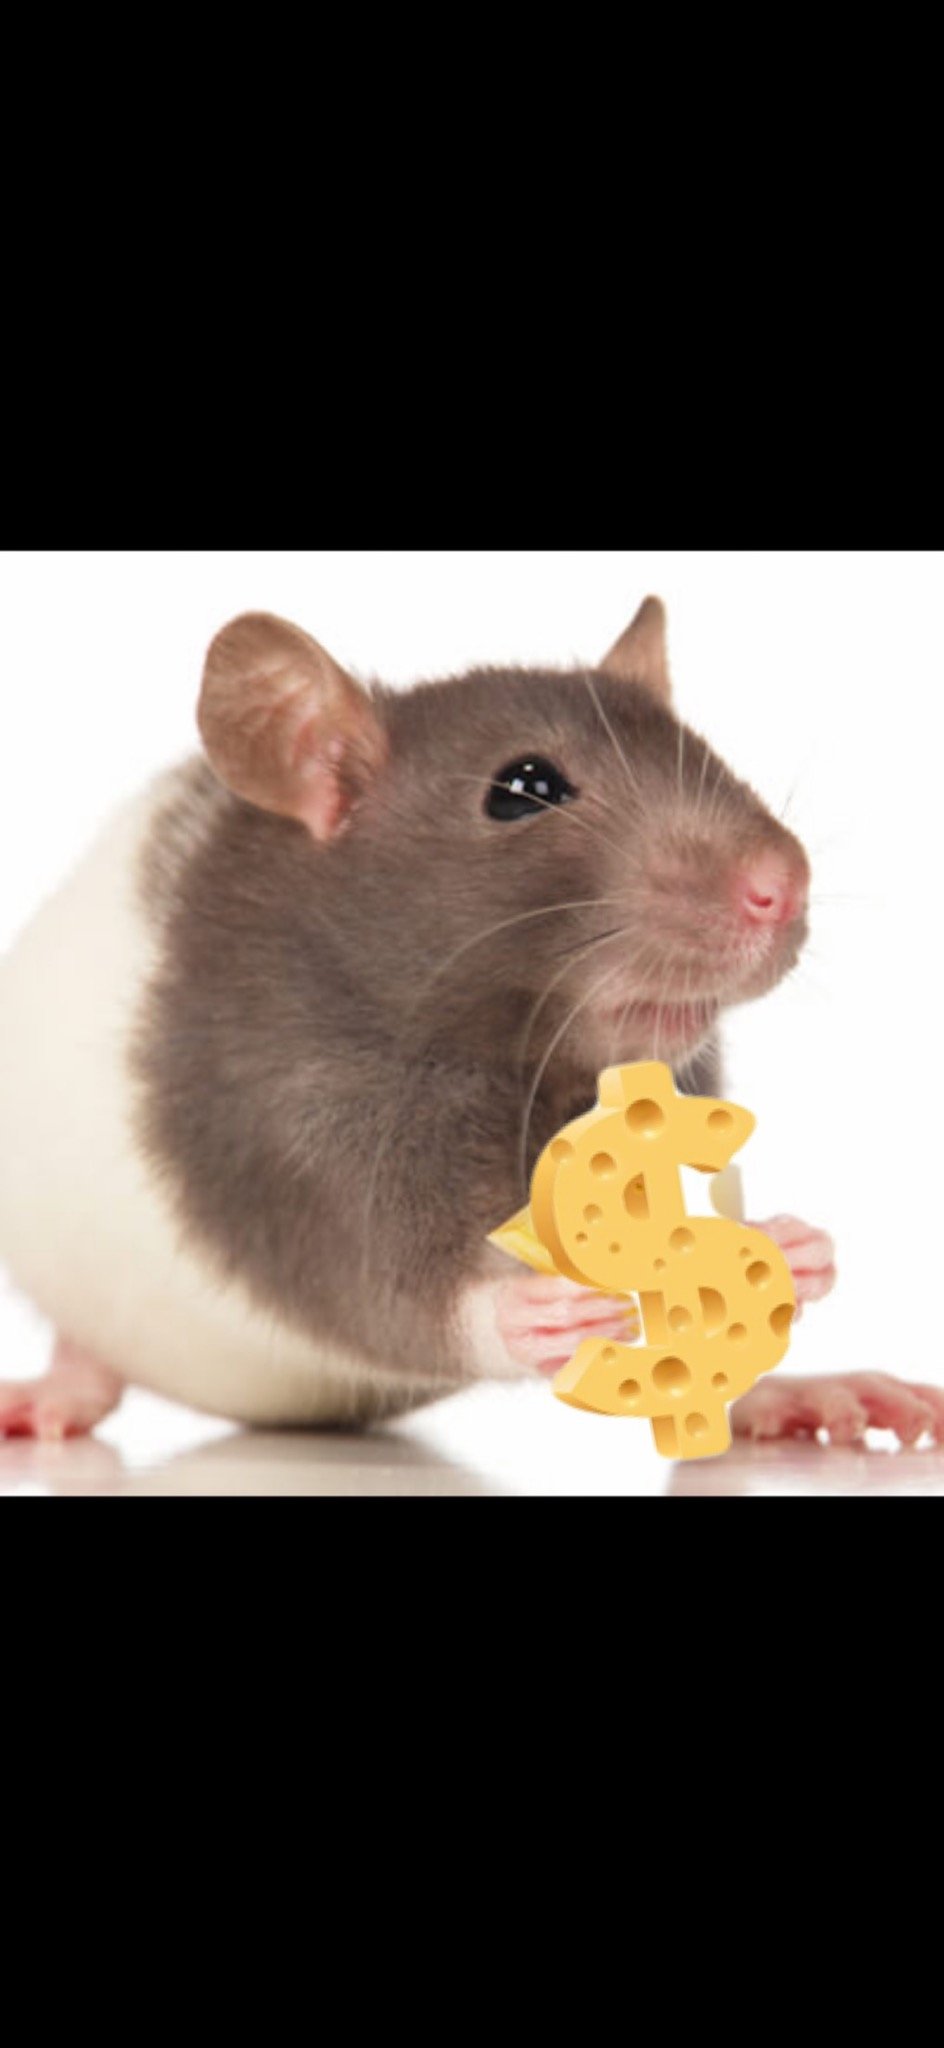 If you want the cheese, come to the rat. FREE DAILY SPORTS PICKS Cheddar Cheese Parlay of the day Follow our Instagram @lil_rat_picks